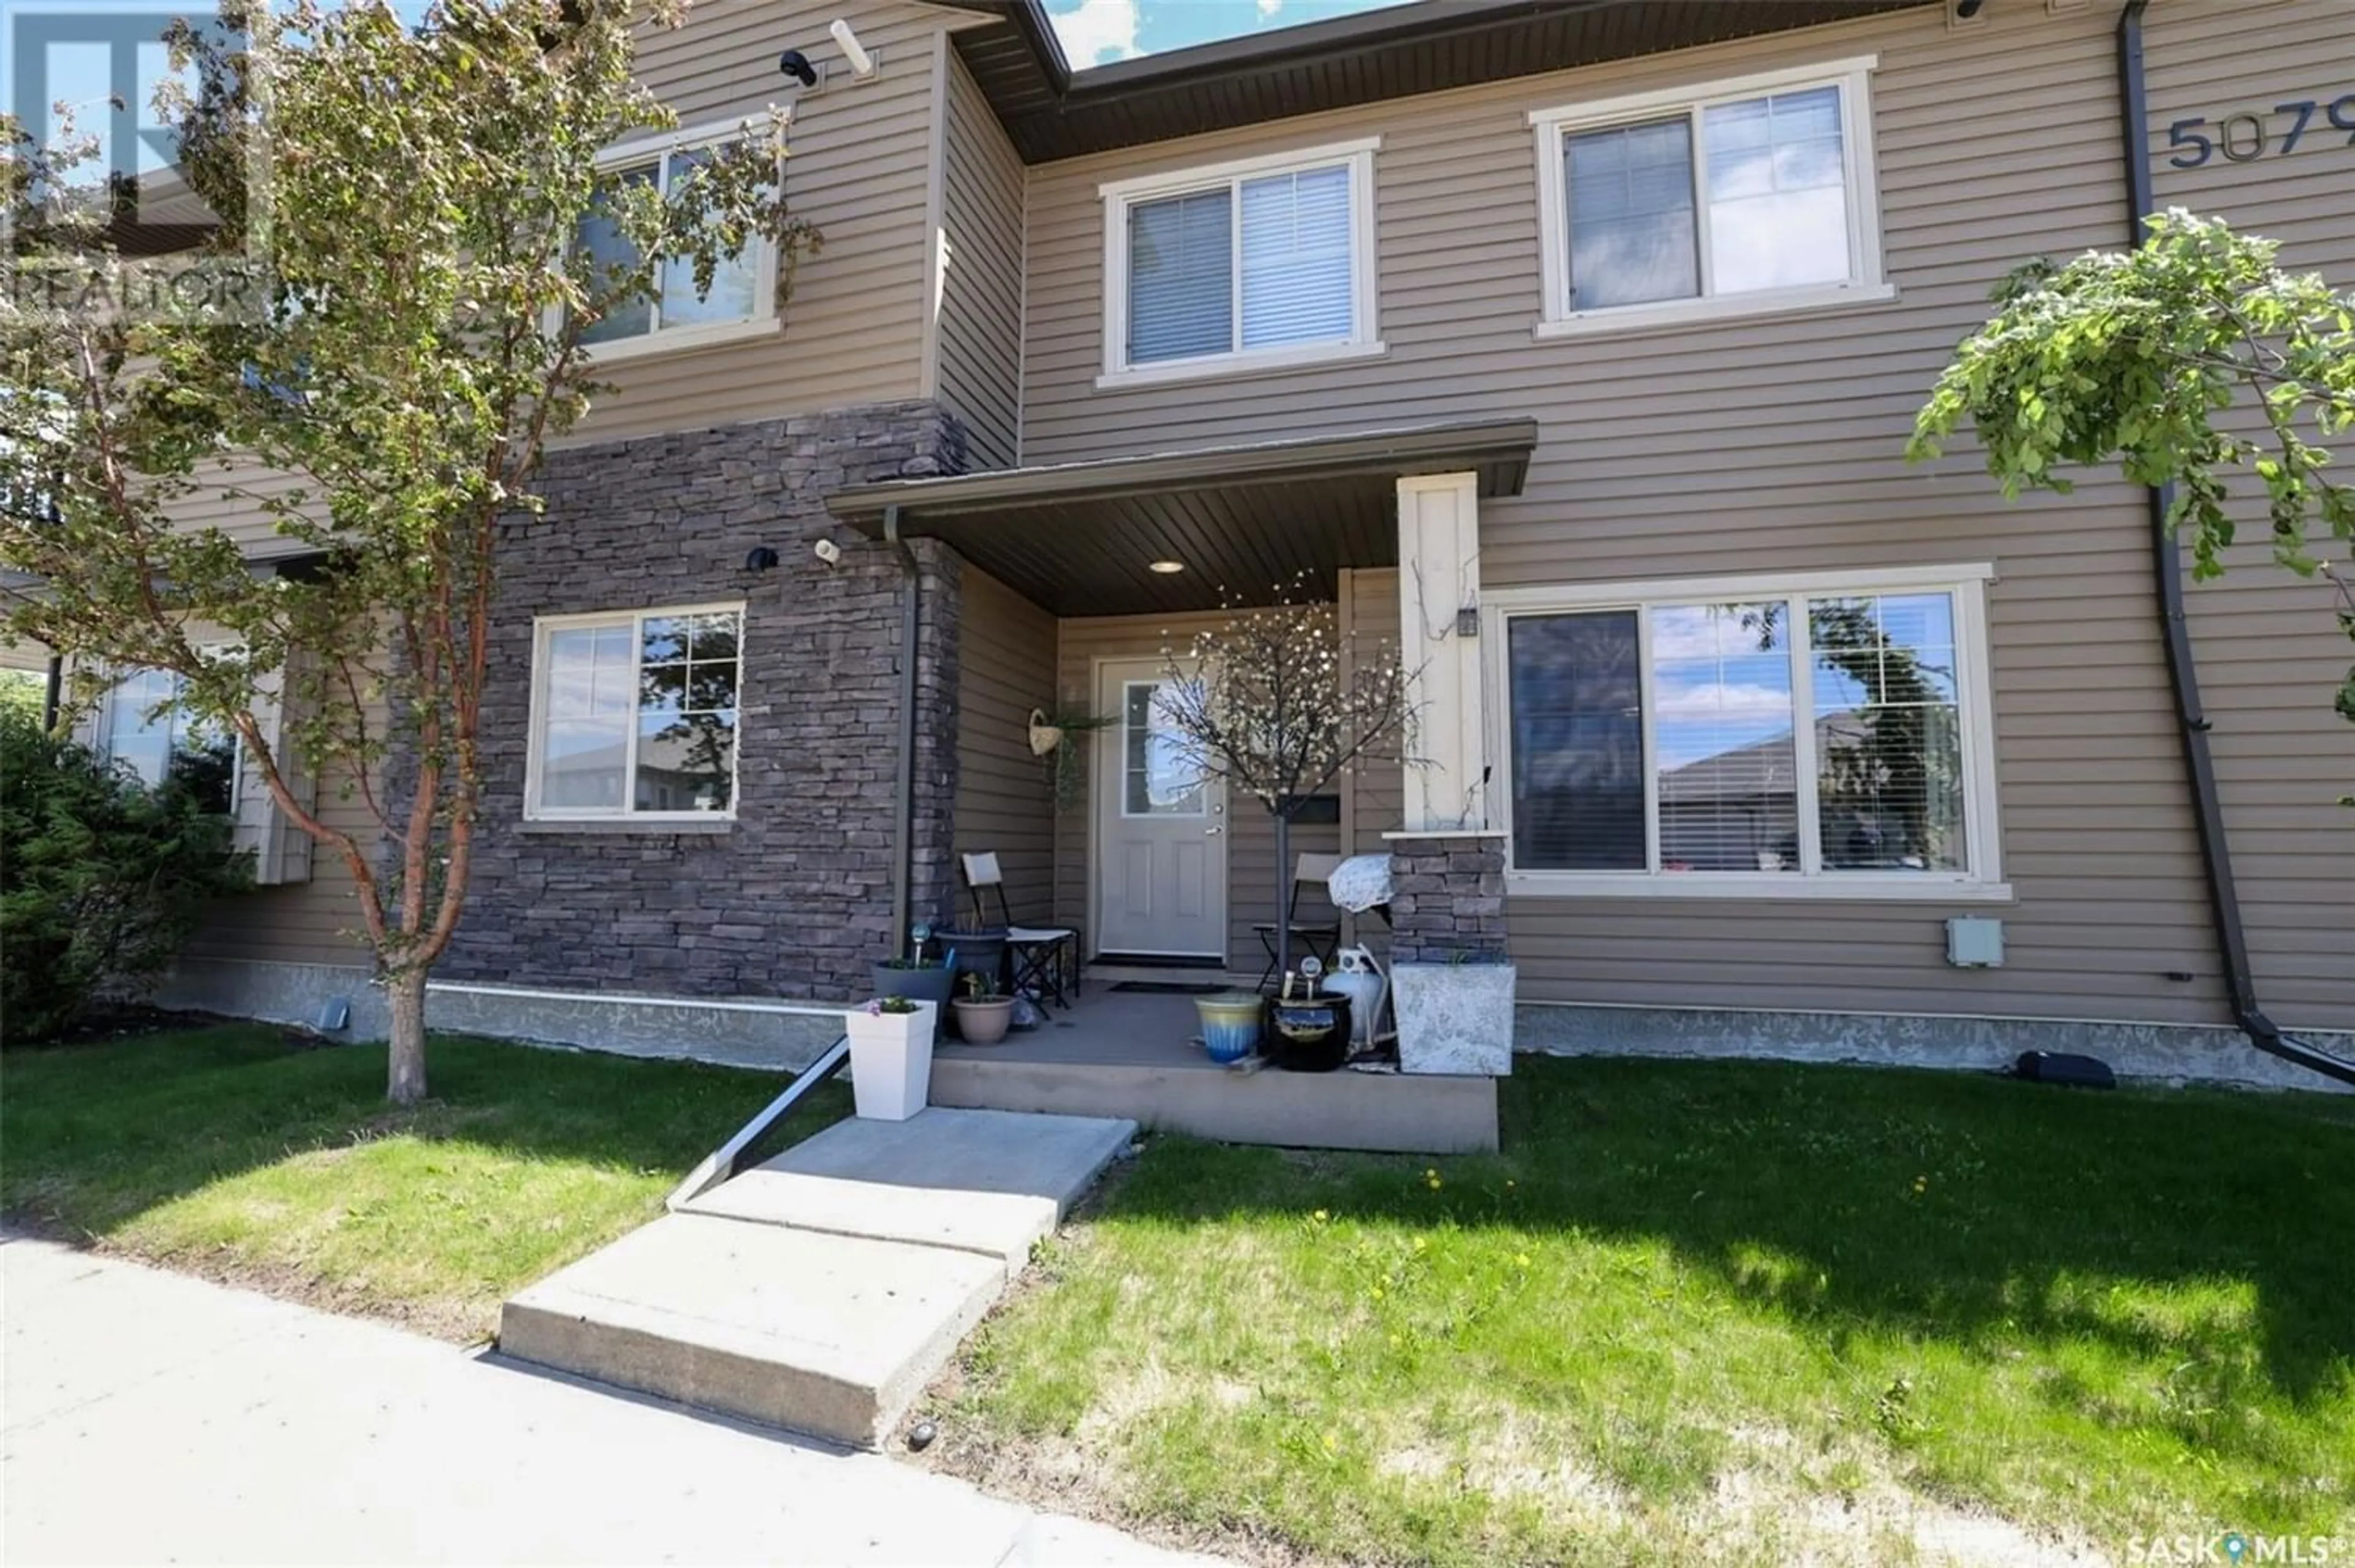 A pic from exterior of the house or condo for 173 5079 James Hill ROAD, Regina Saskatchewan S4W0B9